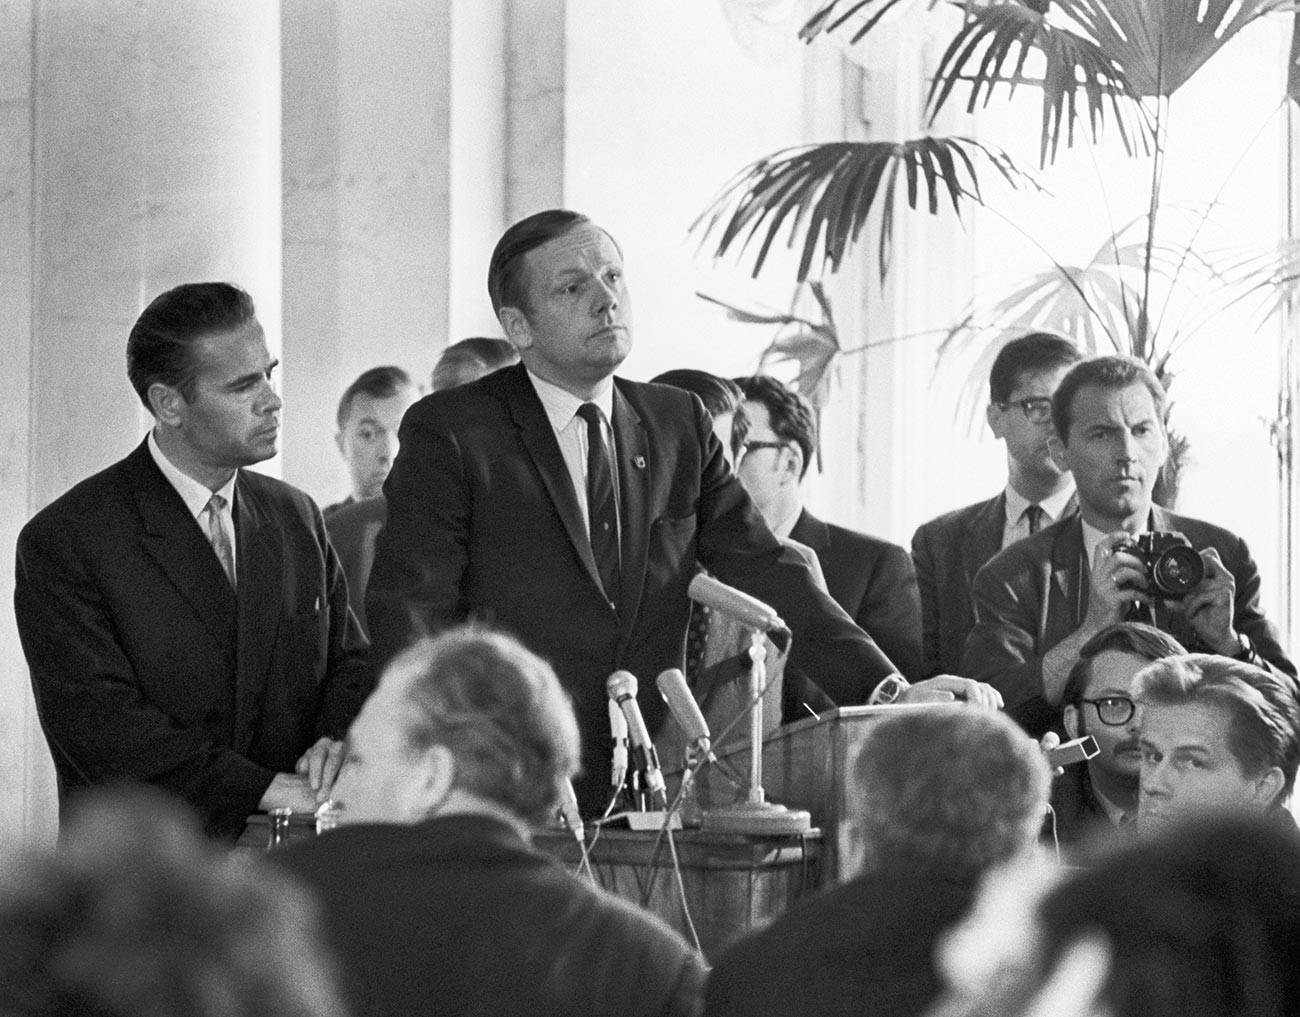 Moscow. American astronaut, the first person to set foot on the moon on July 20, 1969 during the Apollo 11 lunar expedition, Neil Armstrong (center) during a press conference at the USSR Academy of Sciences.